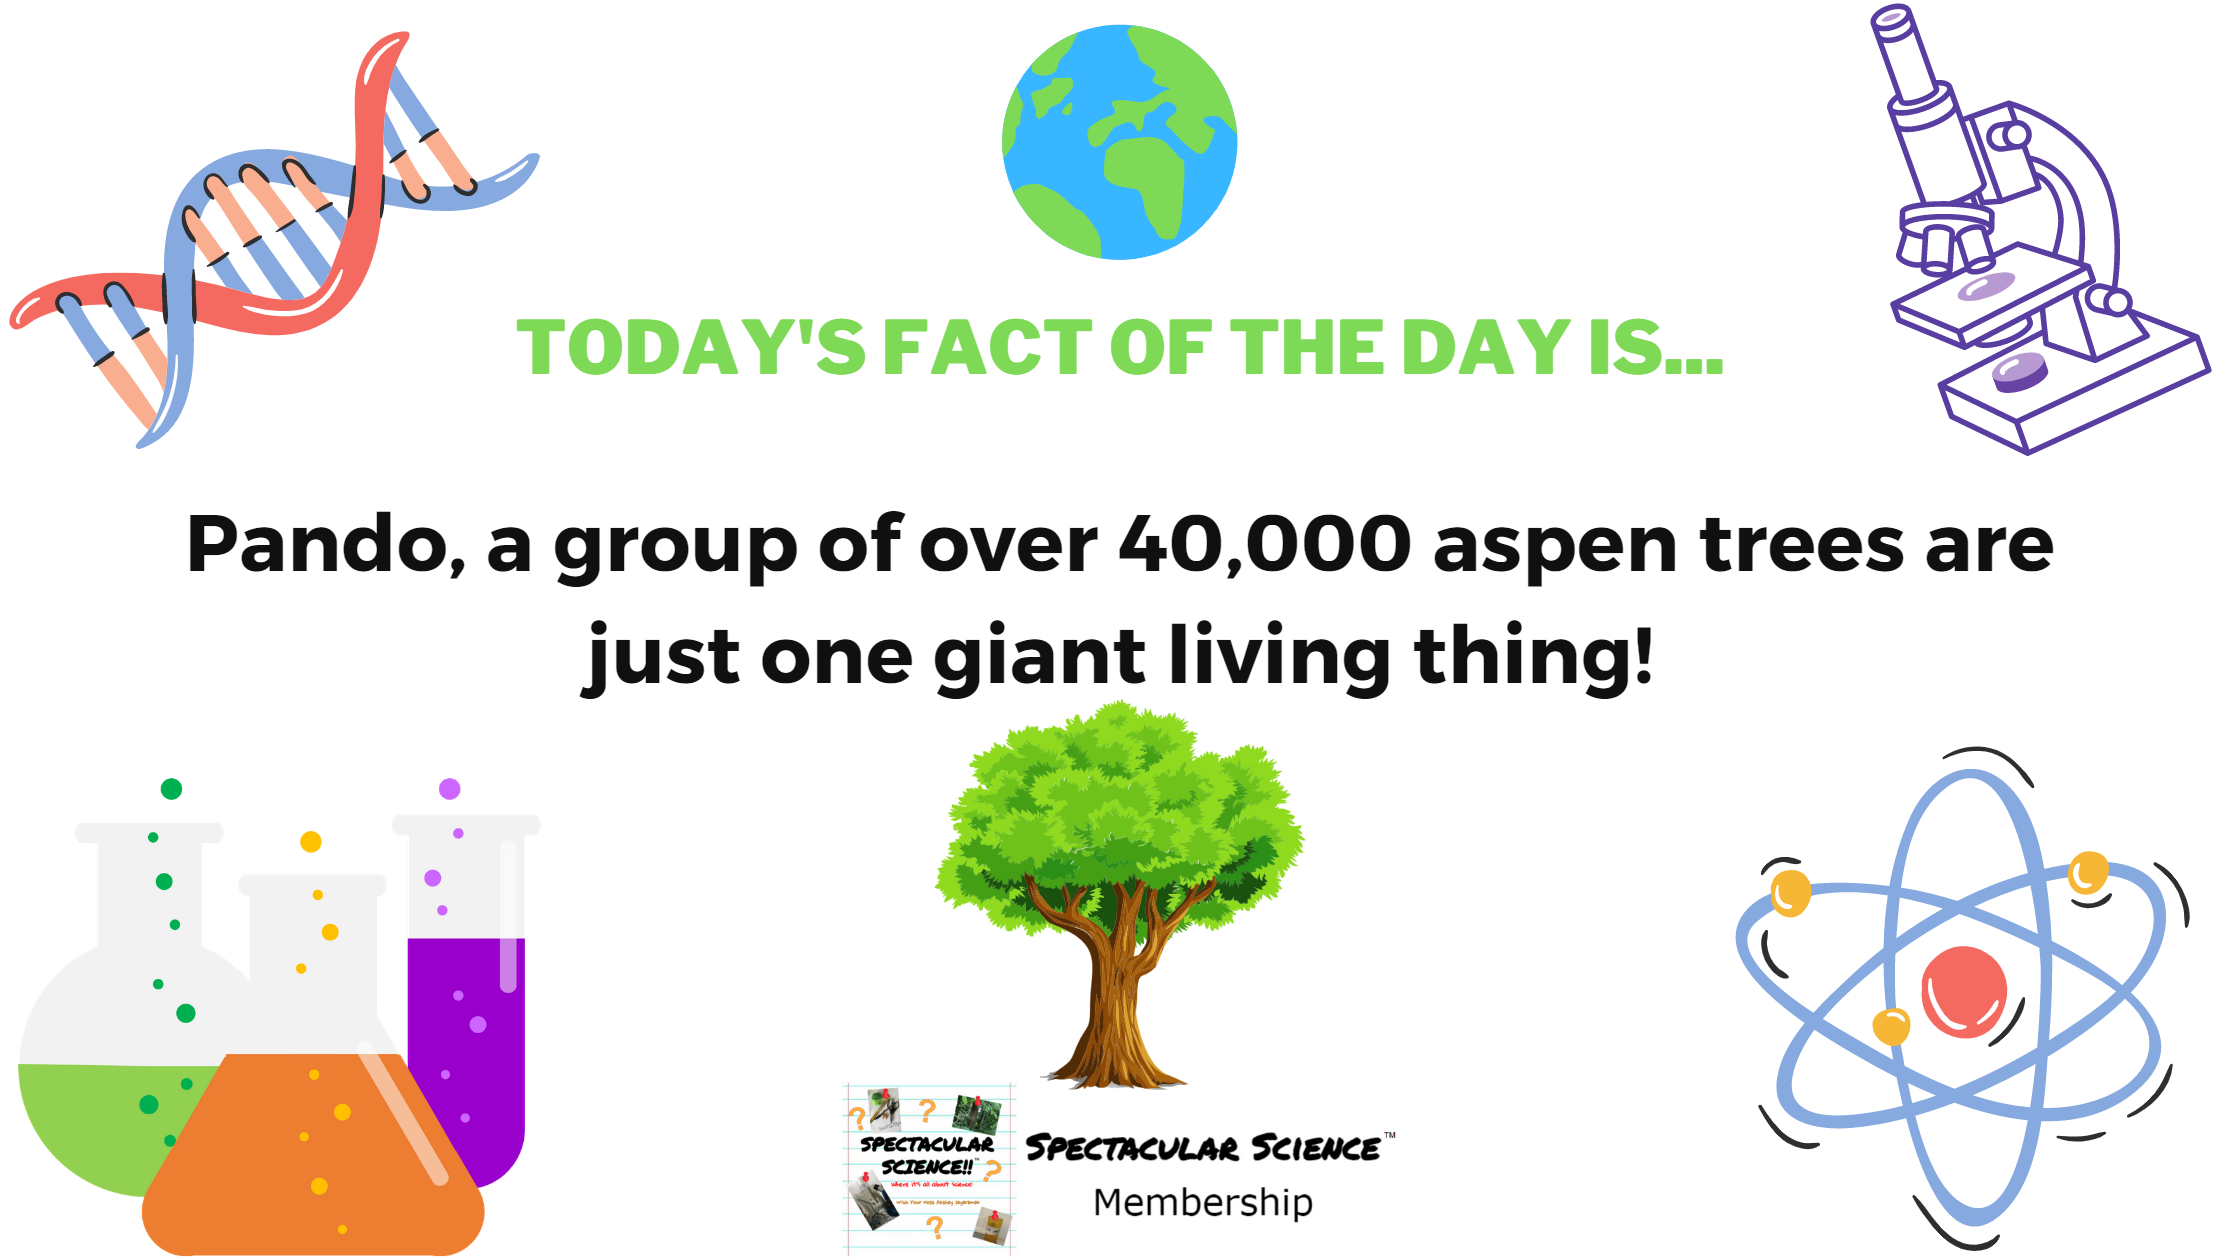 Fact of the Day Image February 5th